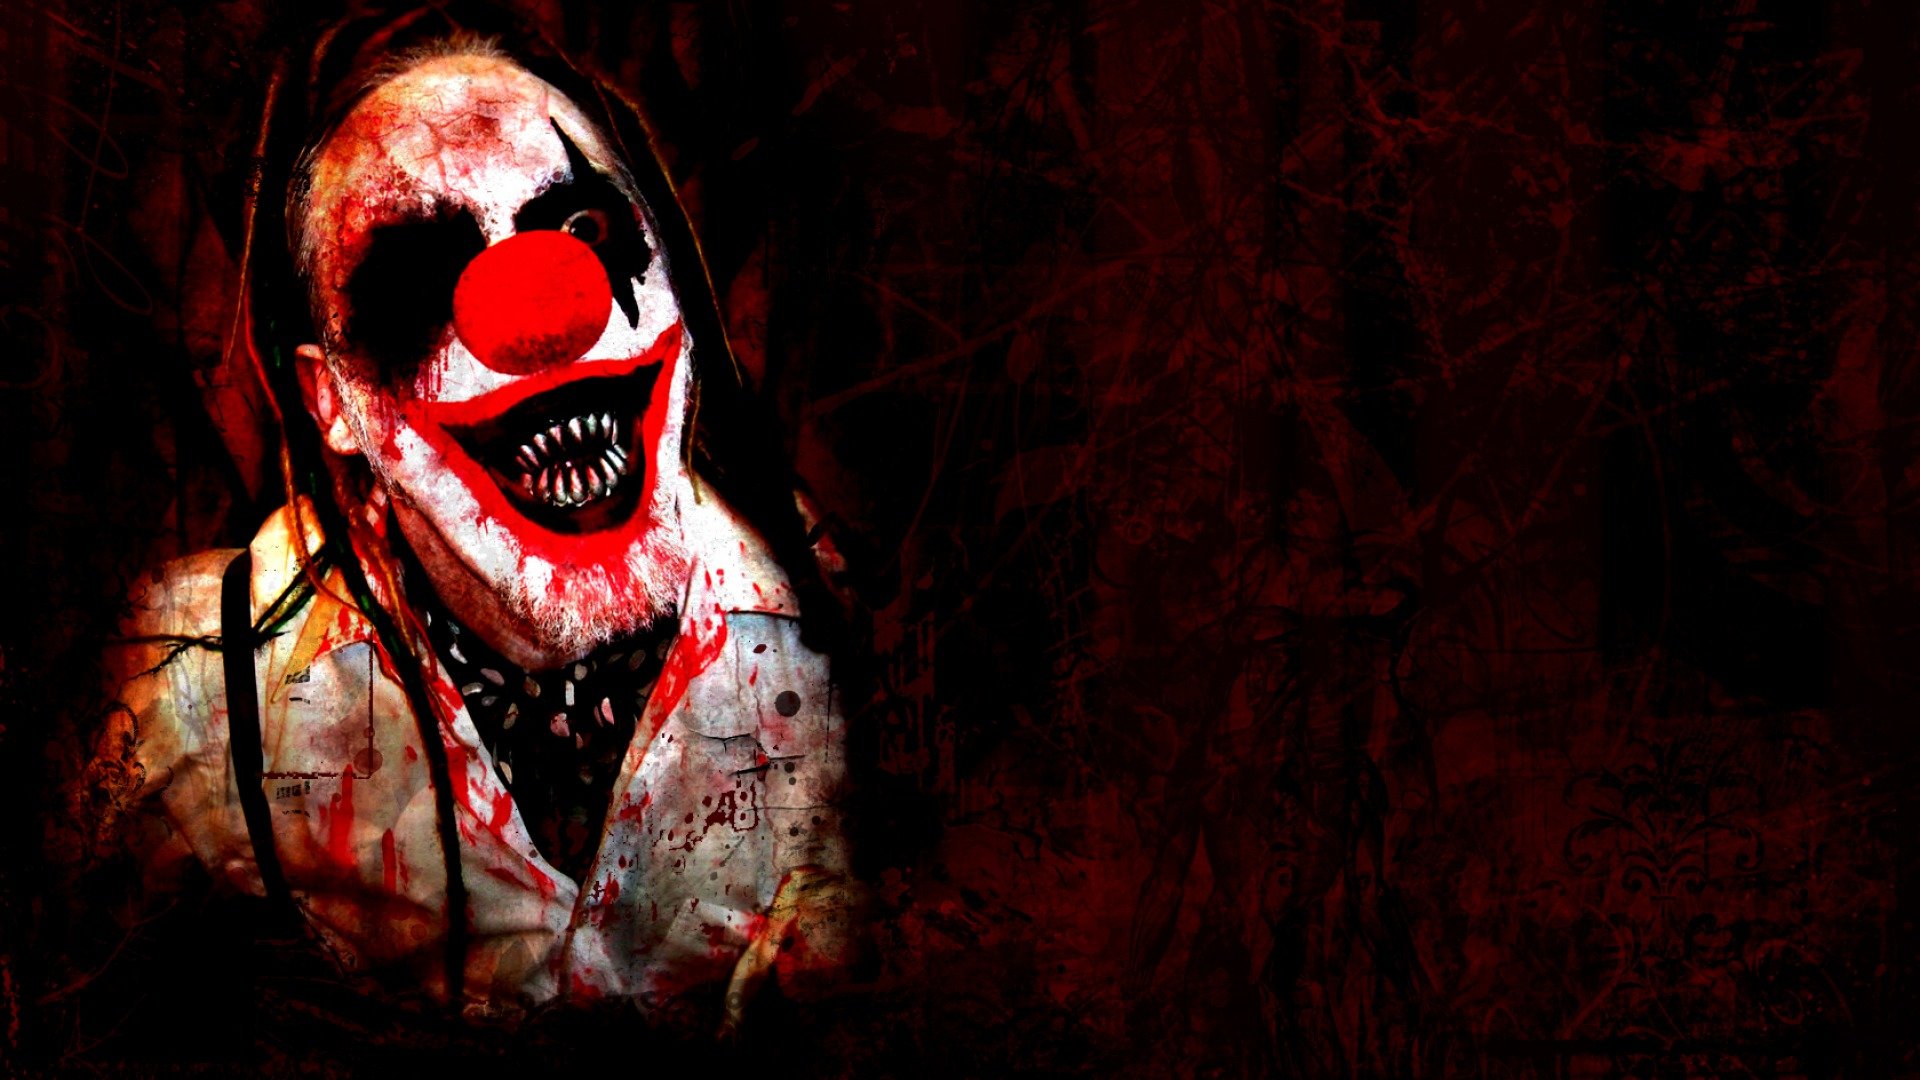 Download 1080p Scary clown PC wallpaper ID:126516 for free